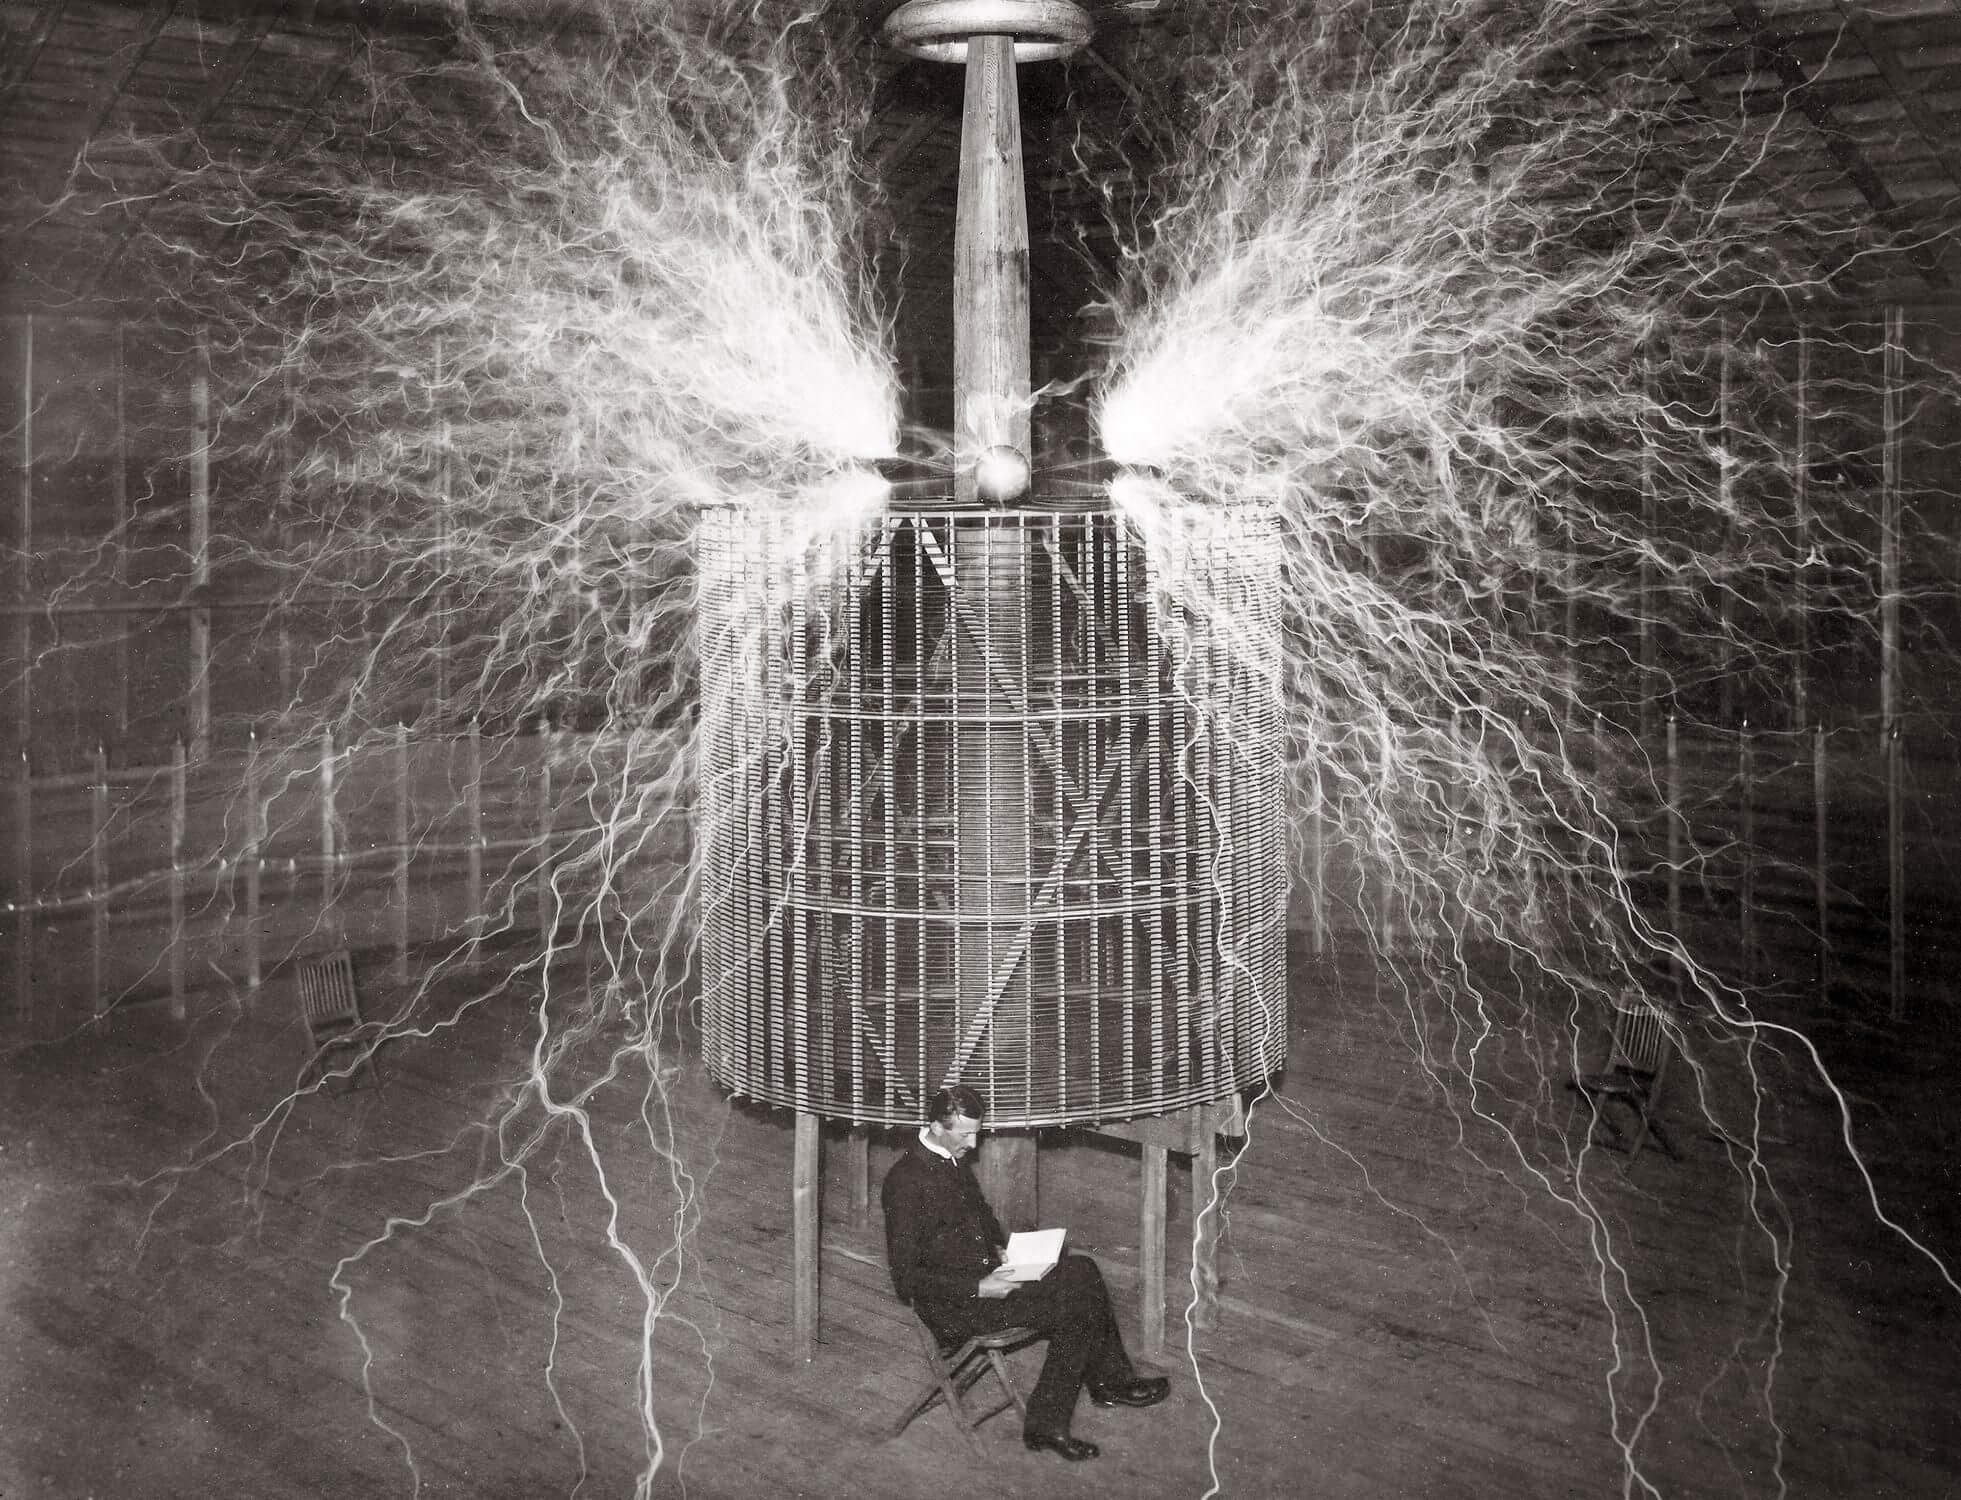 Nikola Tesla: the man who invented too much